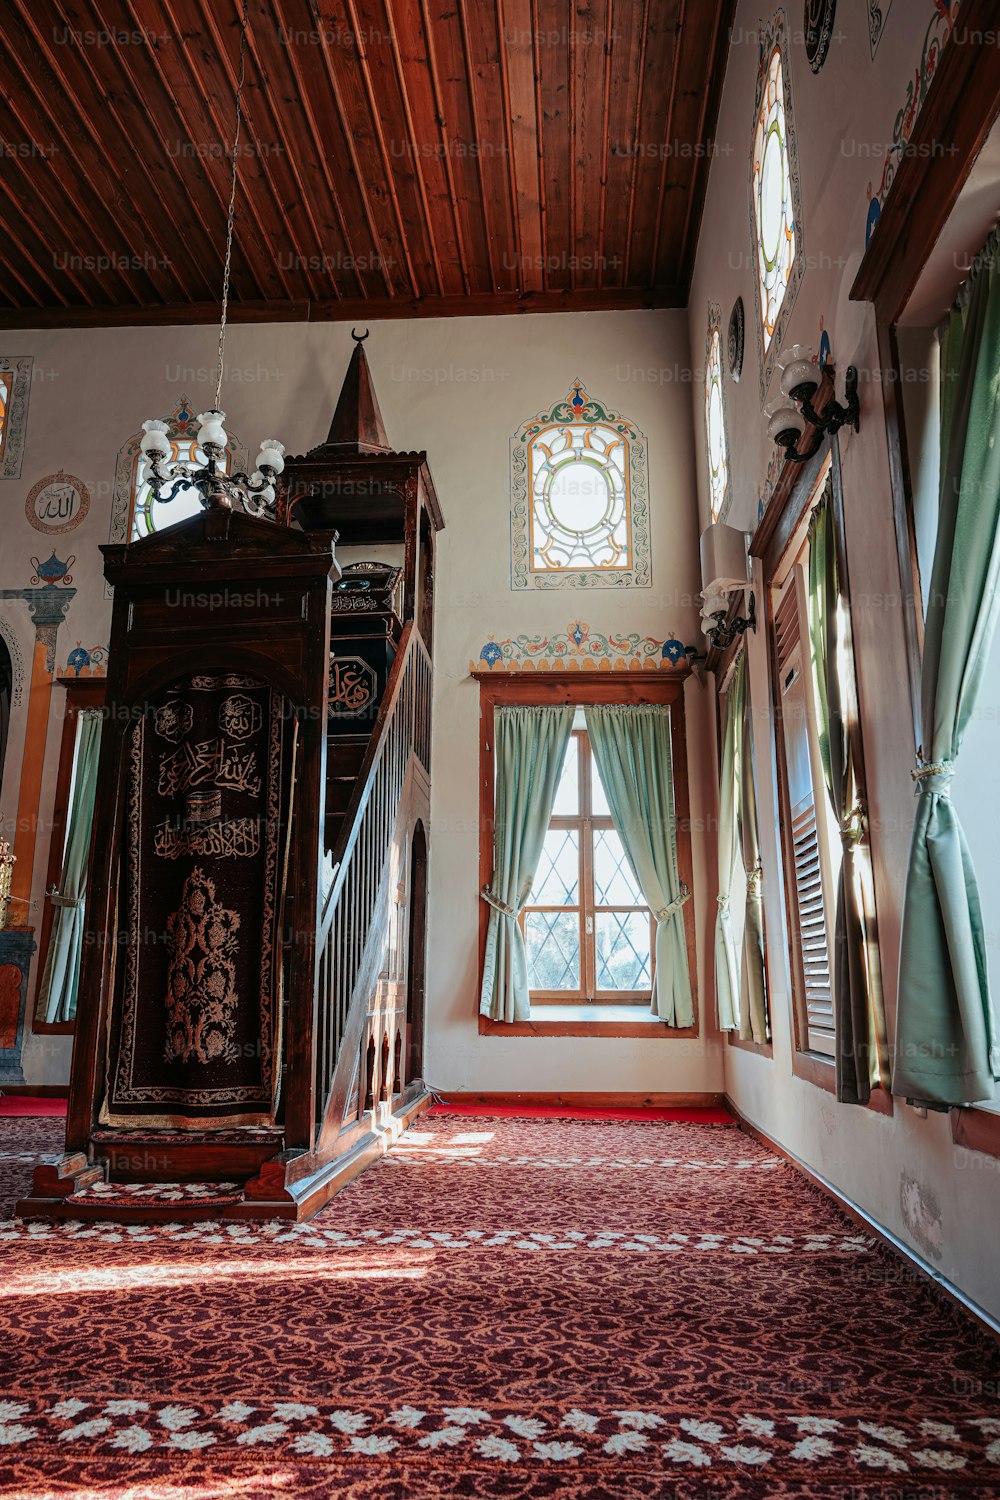 a room with a large wooden grandfather clock in it